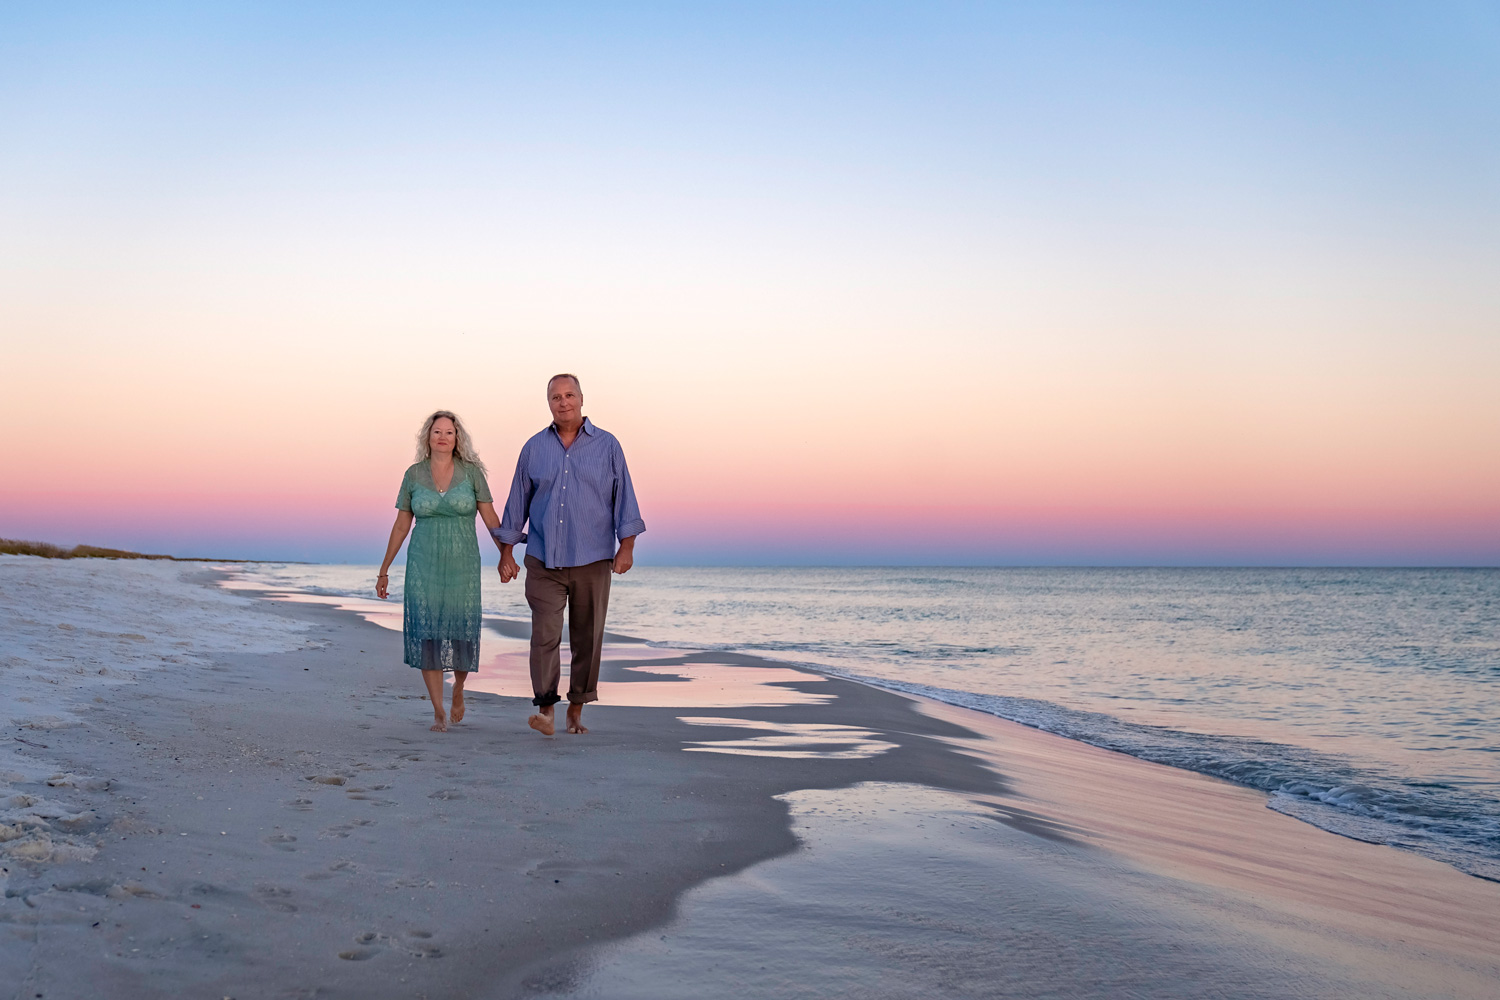 A man and woman walking on the beach at sunset